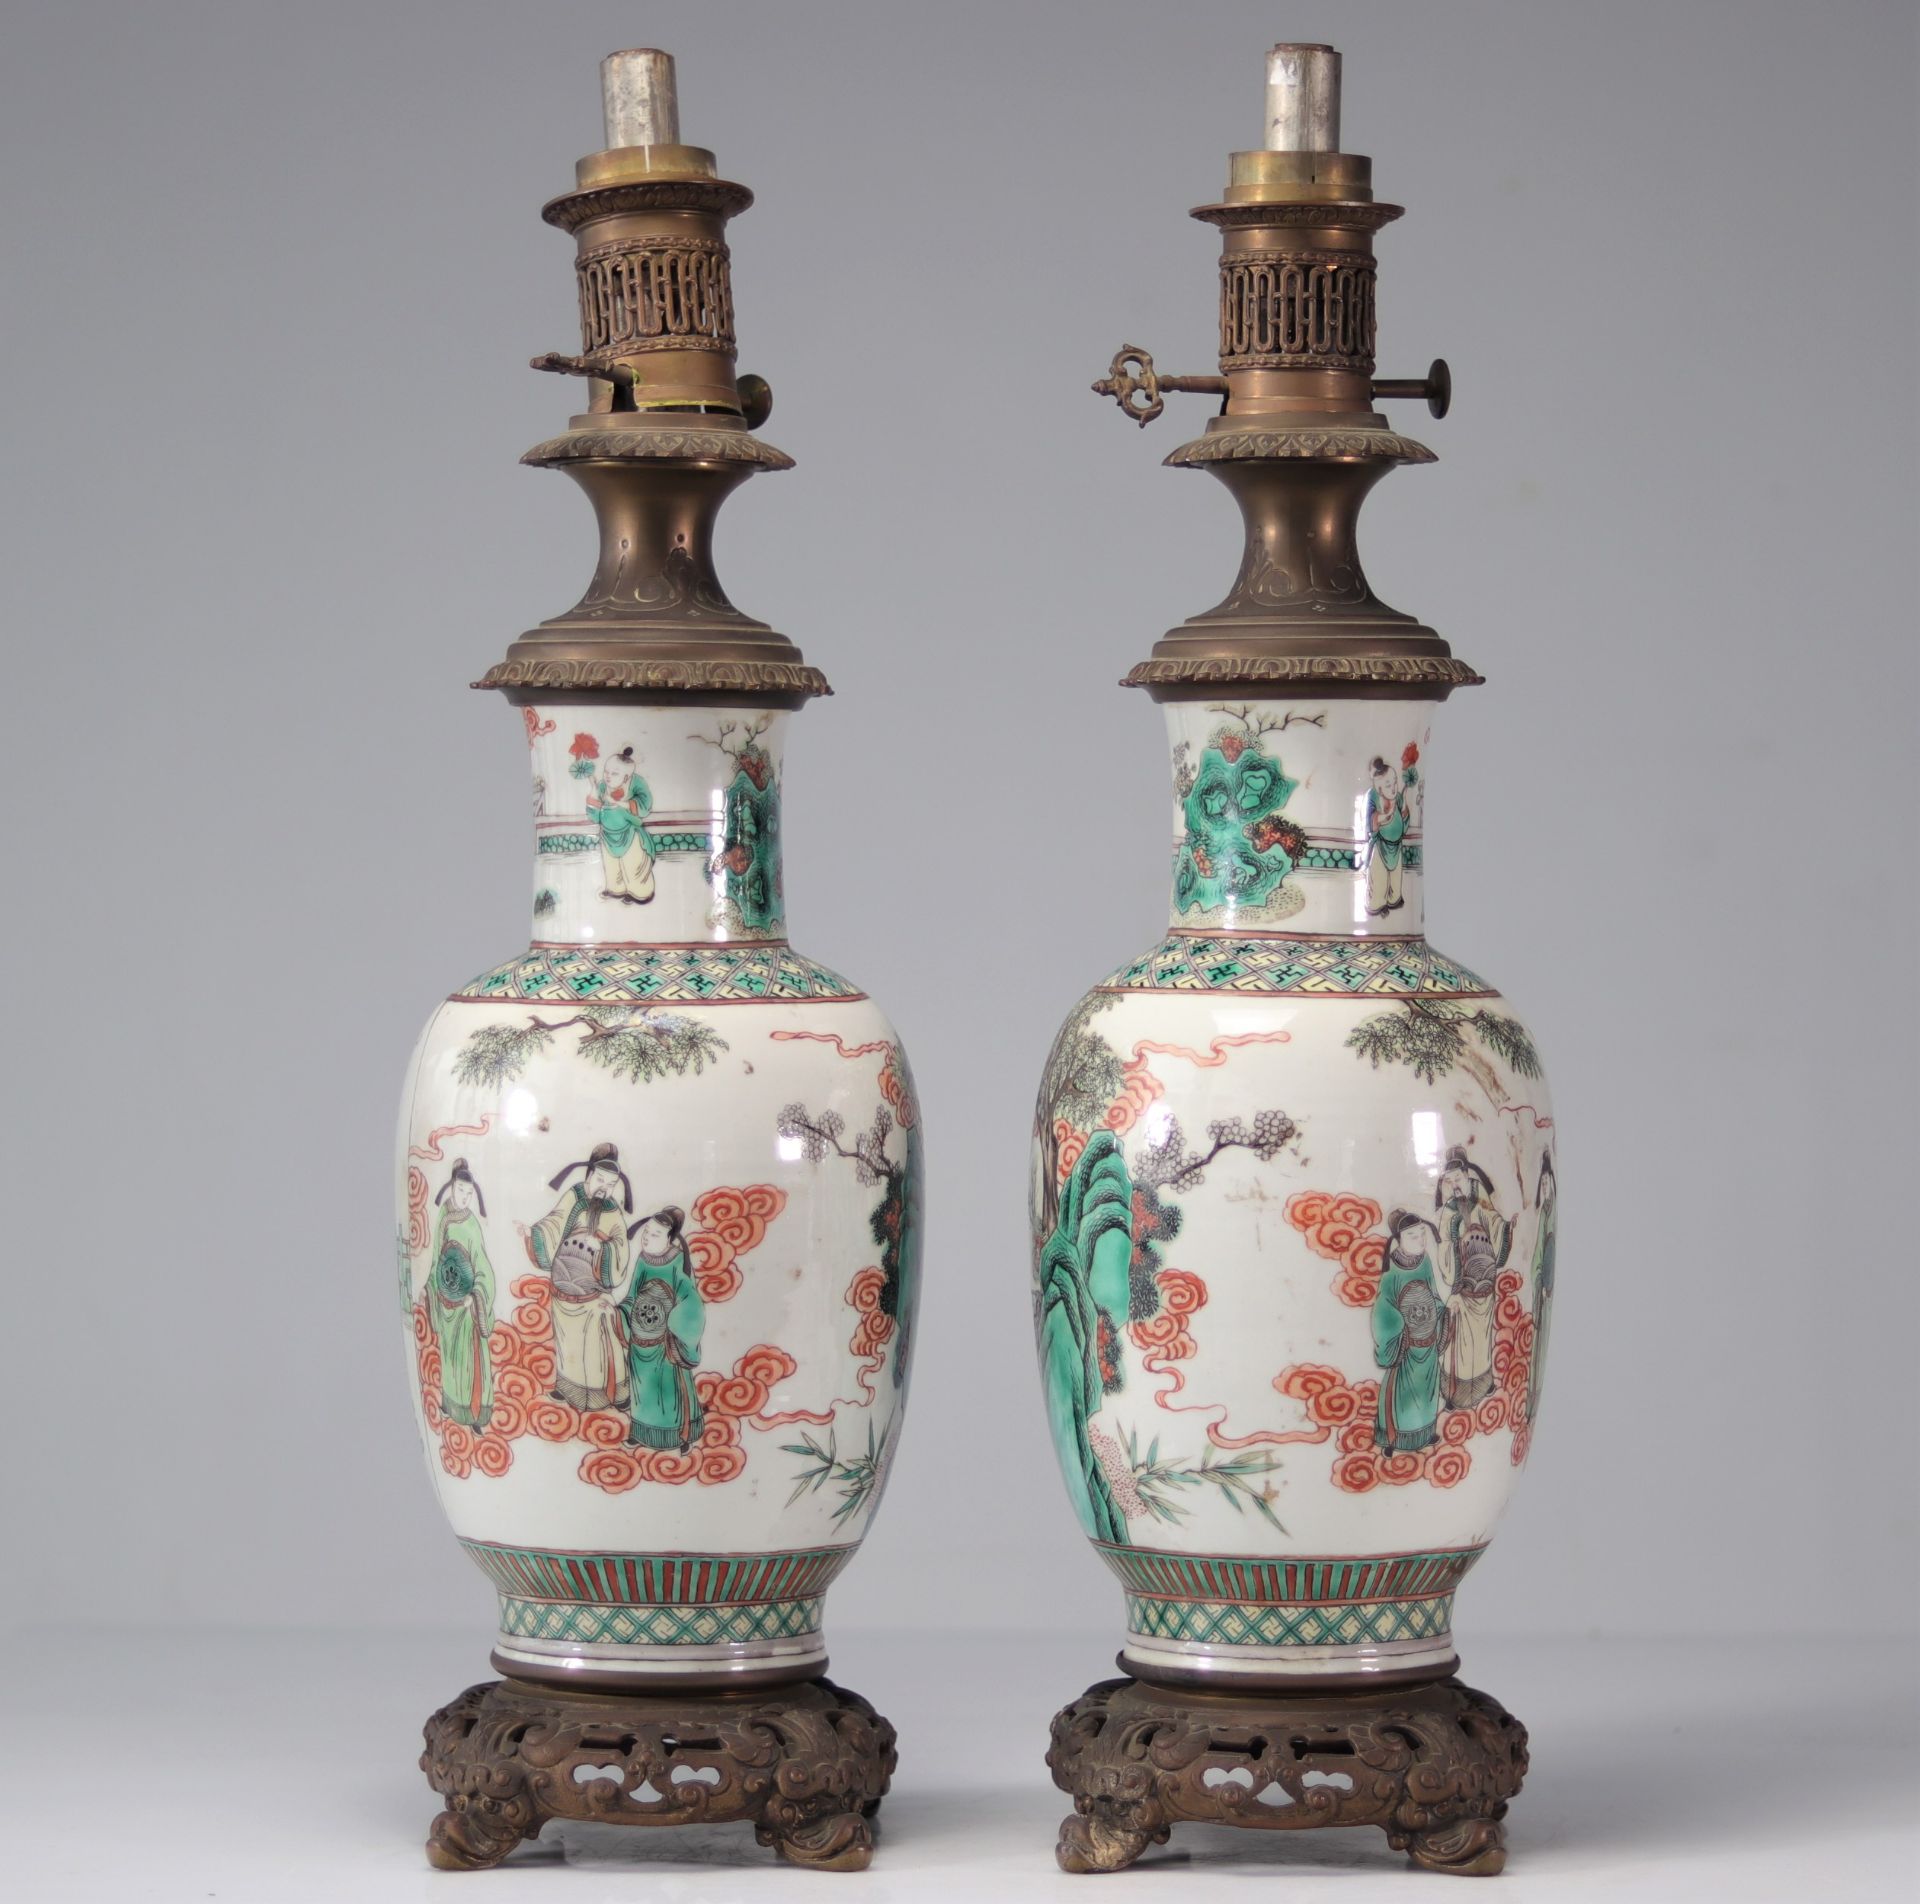 Pair of famille verte porcelain vases decorated with characters